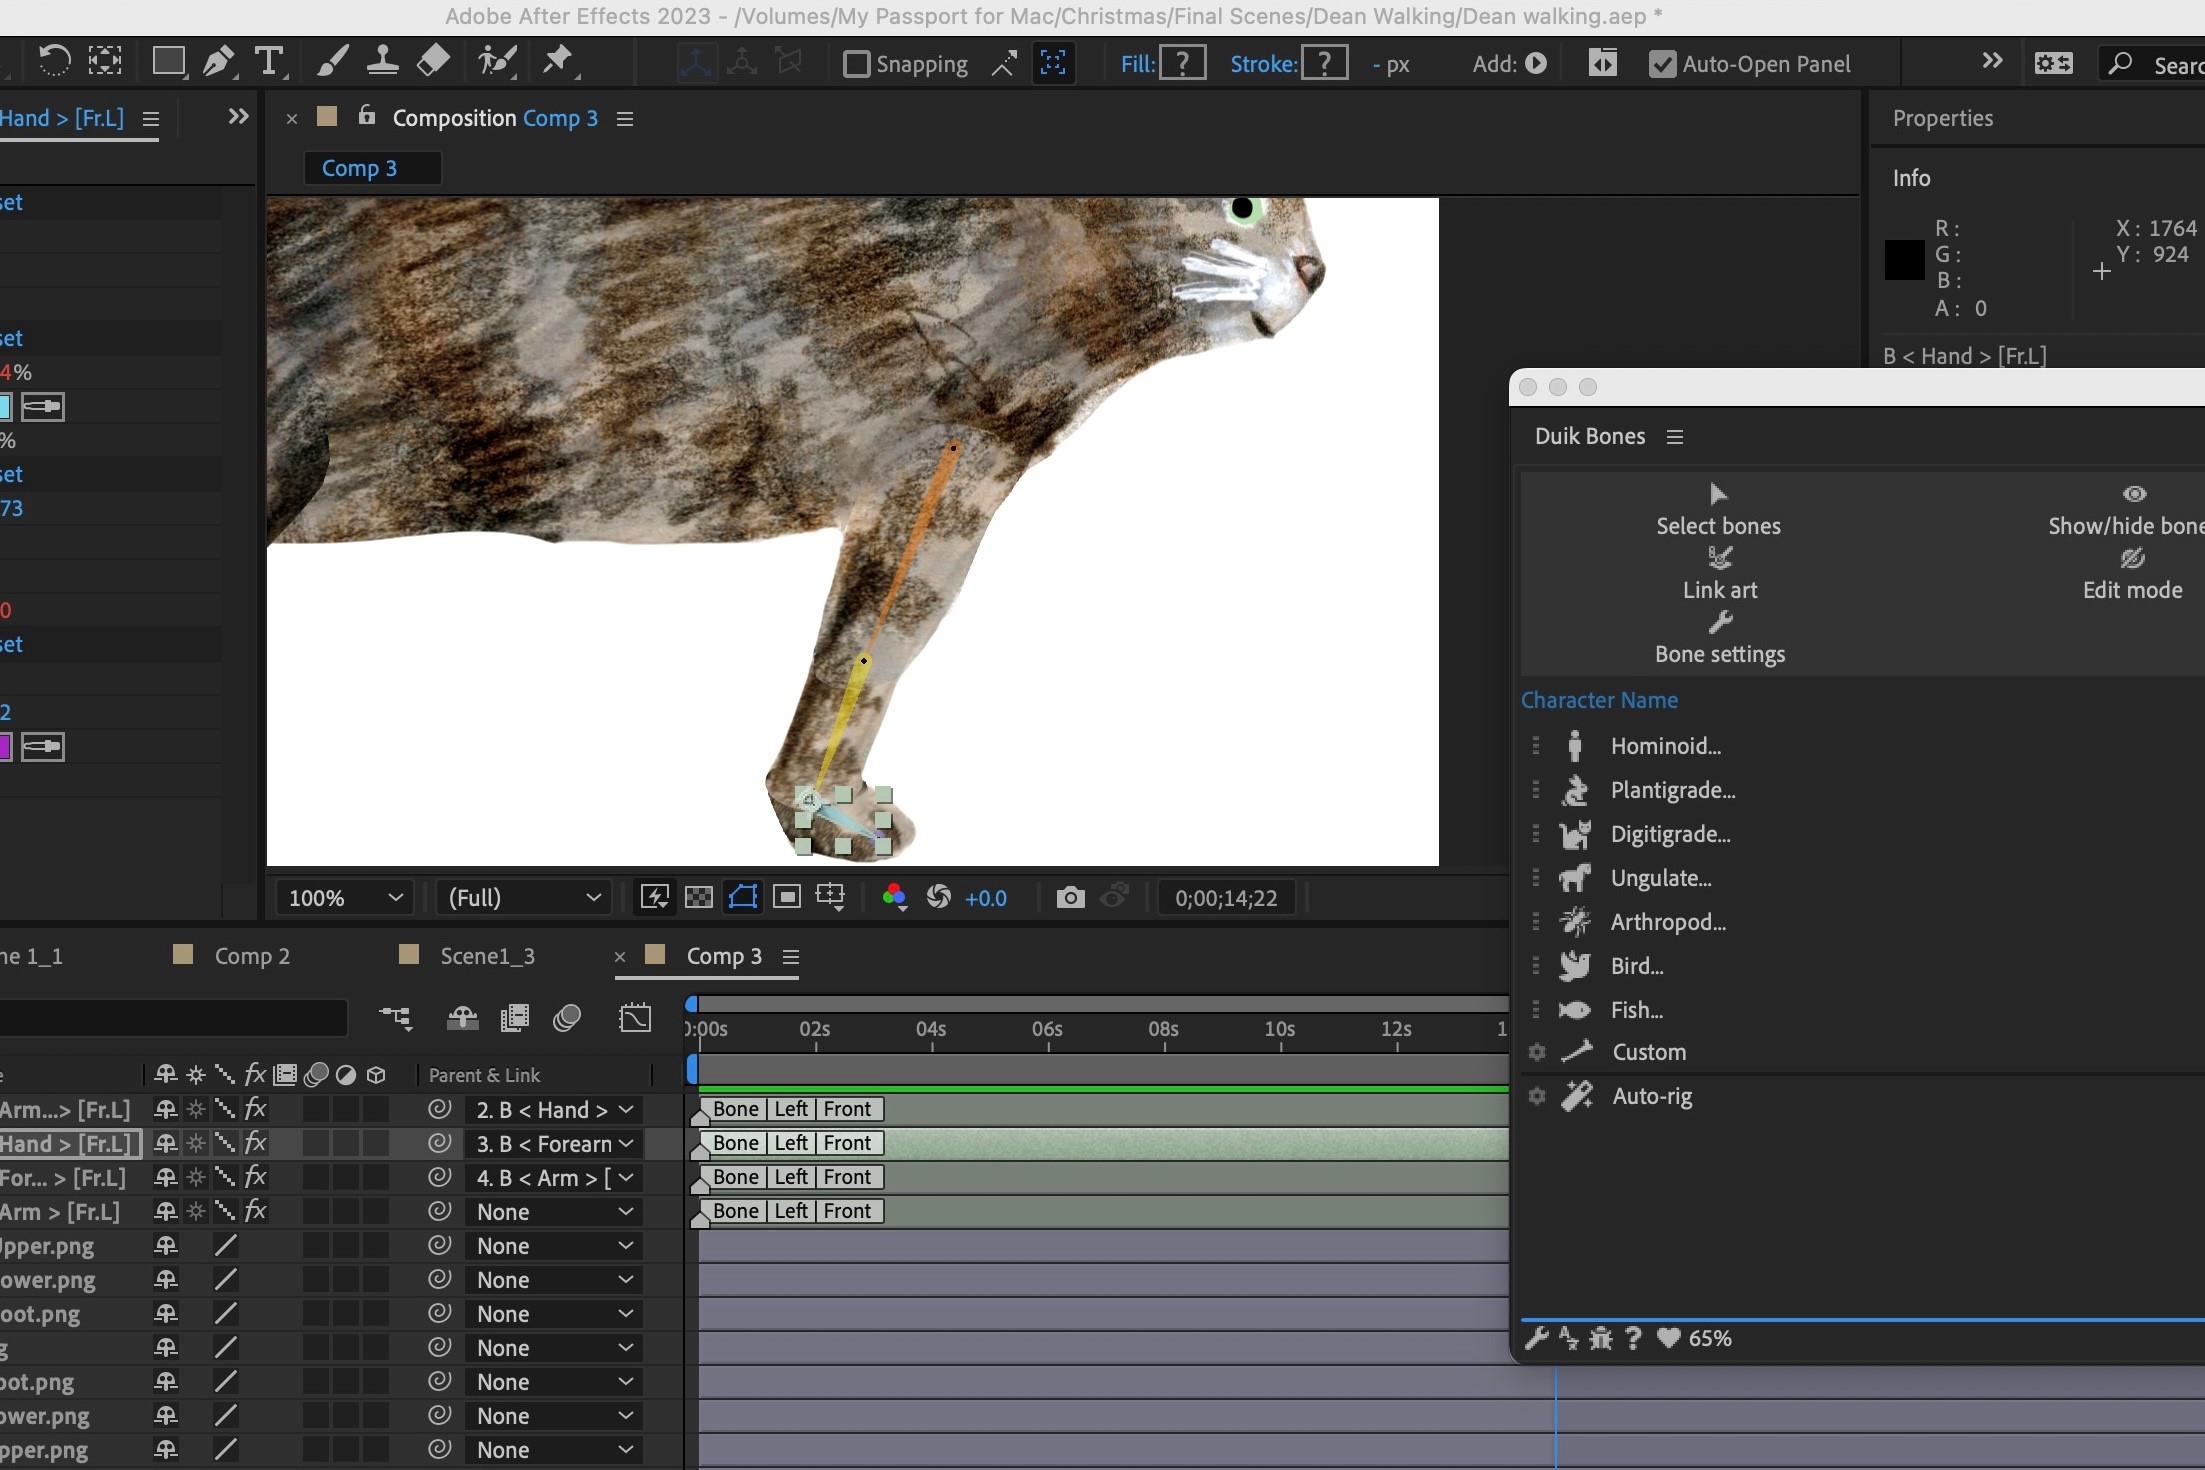 Screenshot of Adobe After Effects interface with an illustration of Bertie, a brown and white tabby cat